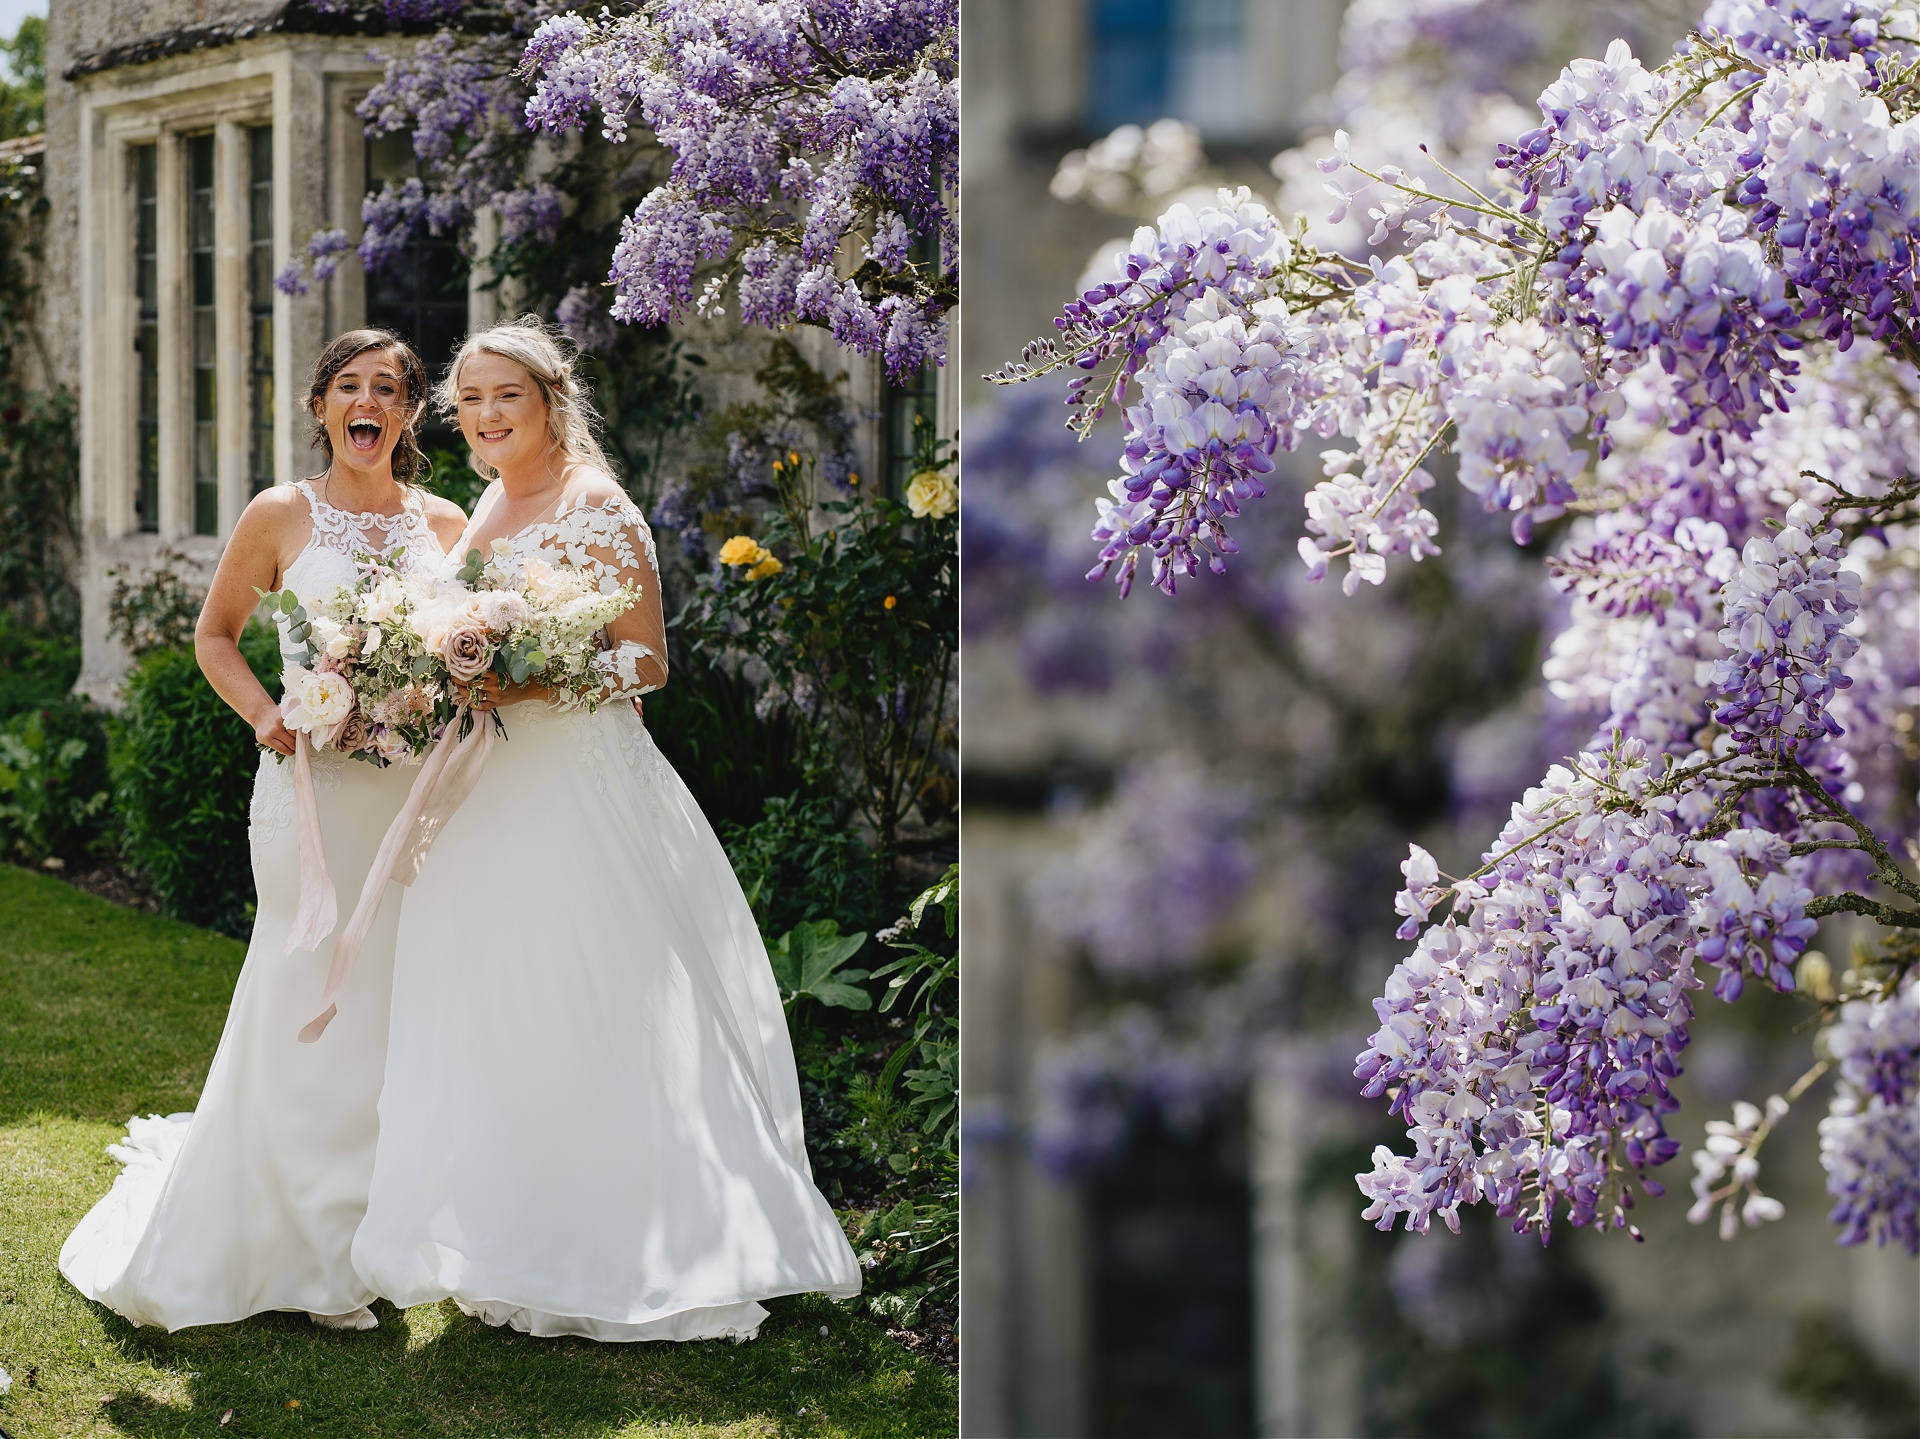 Brides just married in front of wisteria on old walls at Cadhay in Devon